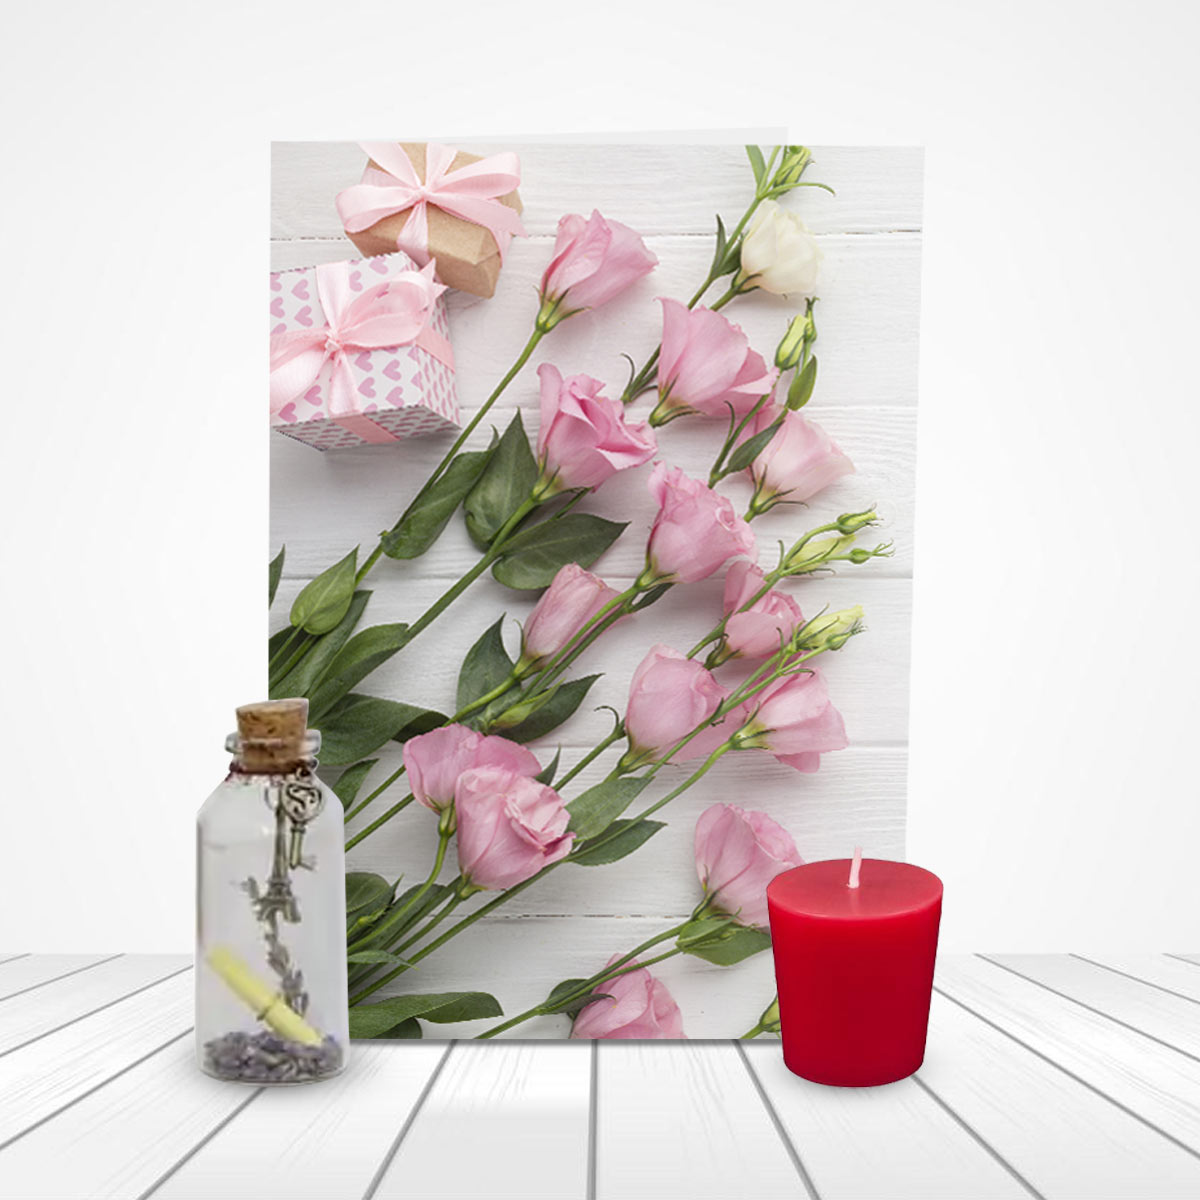 Greeting Card with Message Bottle & Candle